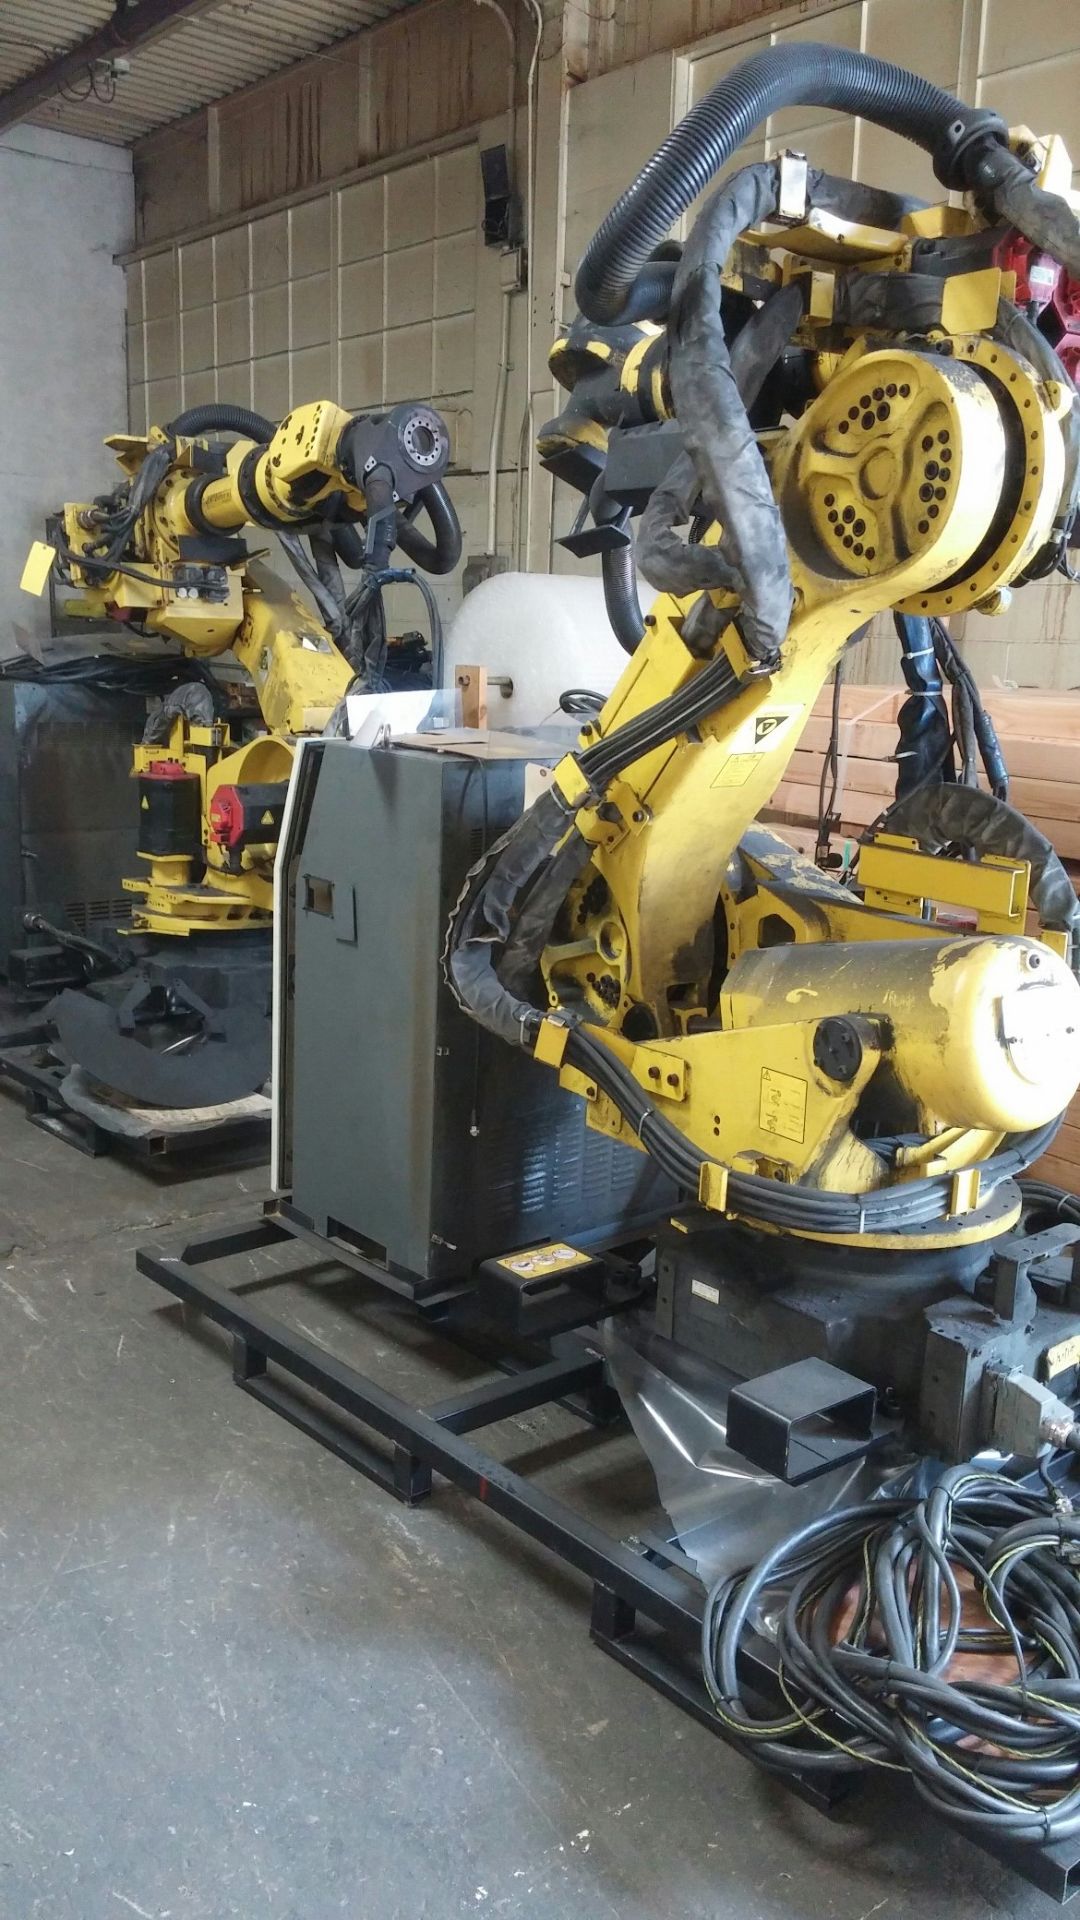 1-FANUC R-2000ia/200F WITH RJ3iB CONTROL, TEACH PENDANT AND CABLES, LOCATION OH, BUYER TO SHIP